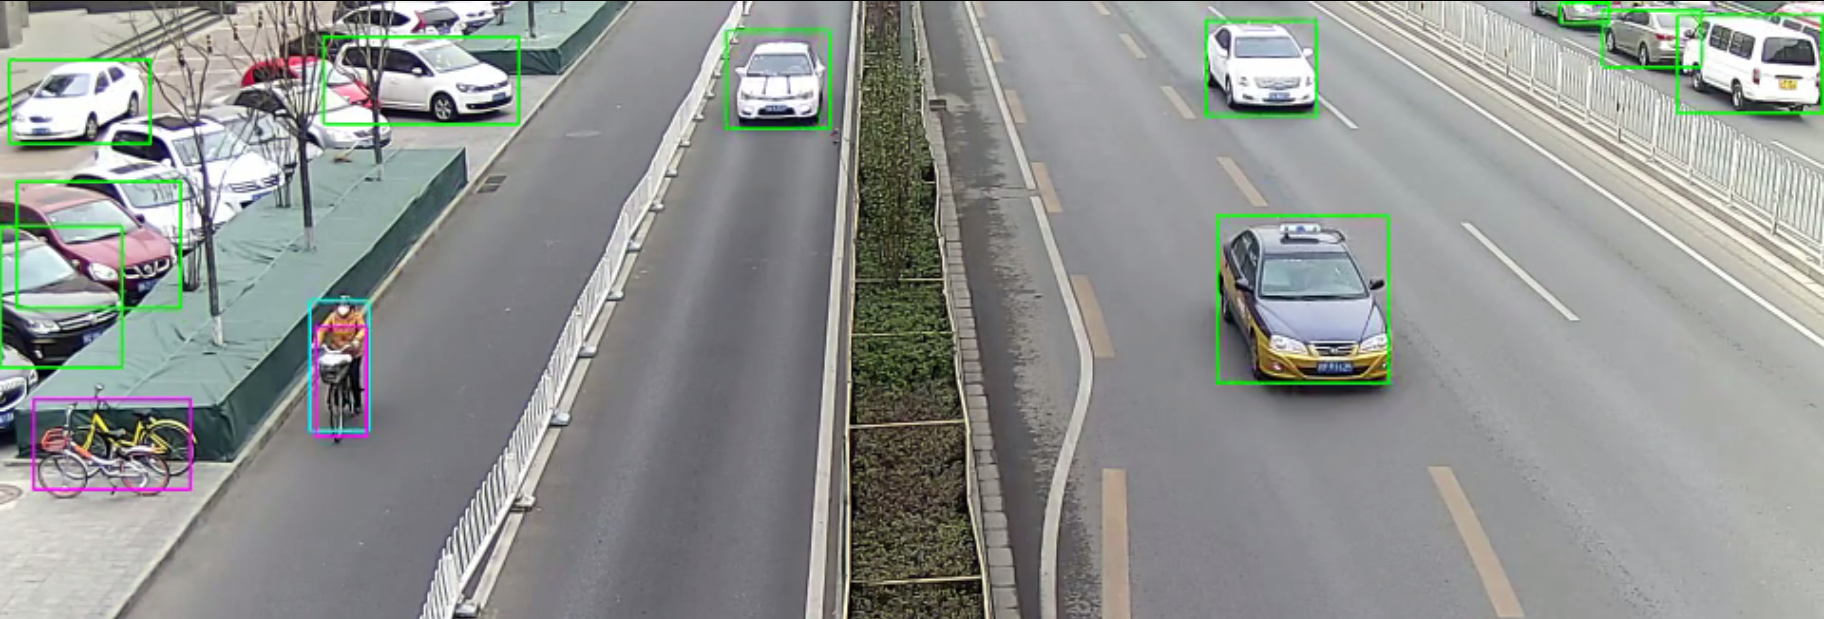 _images/person-vehicle-bike-detection-crossroad-1016.png